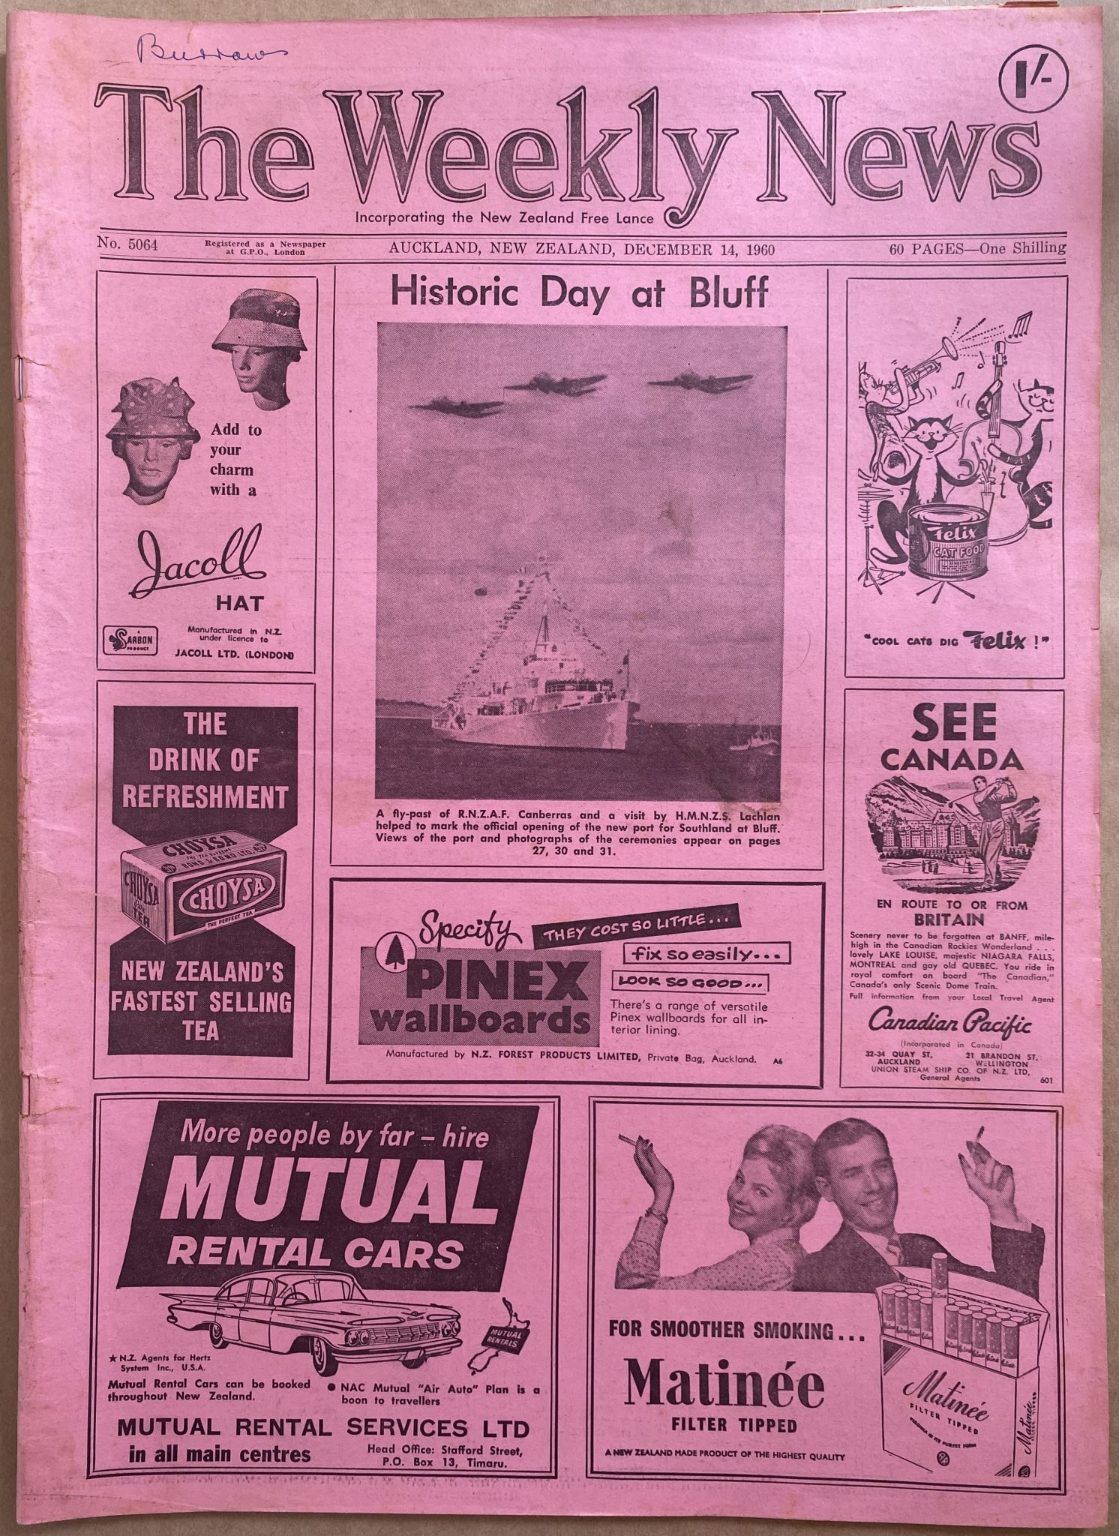 OLD NEWSPAPER: The Weekly News, No. 5064, 14 December 1960